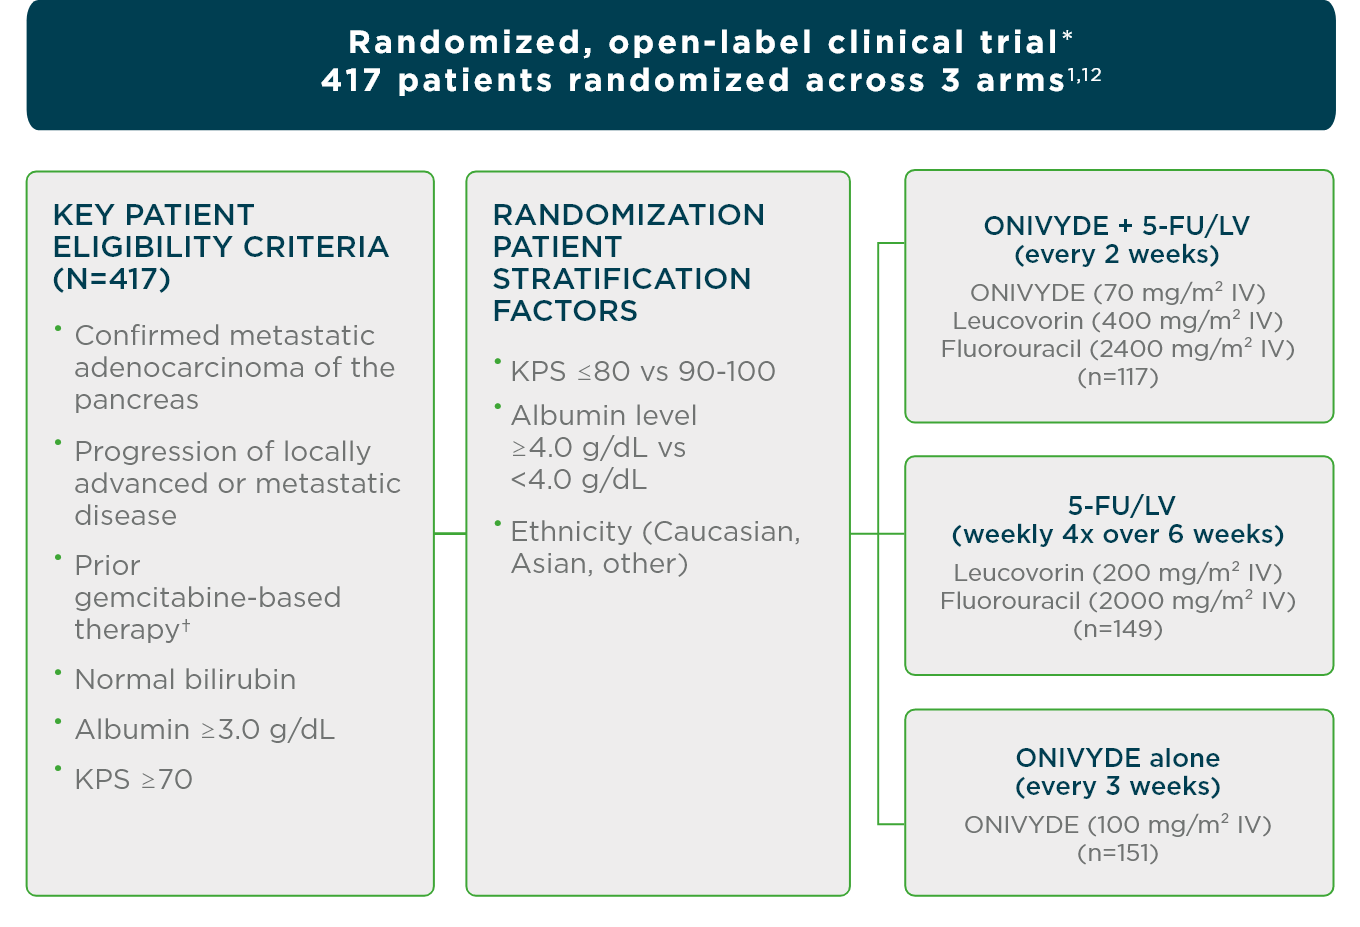 NAPOLI-1 study design: a large, phase 3, open-label clinical trial of patients randomized across 3 arms: ONIVYDE® (irinotecan liposome injection) + 5-FU/LV, 5-FU/LV alone, and ONIVYDE® (irinotecan liposome injection) alone